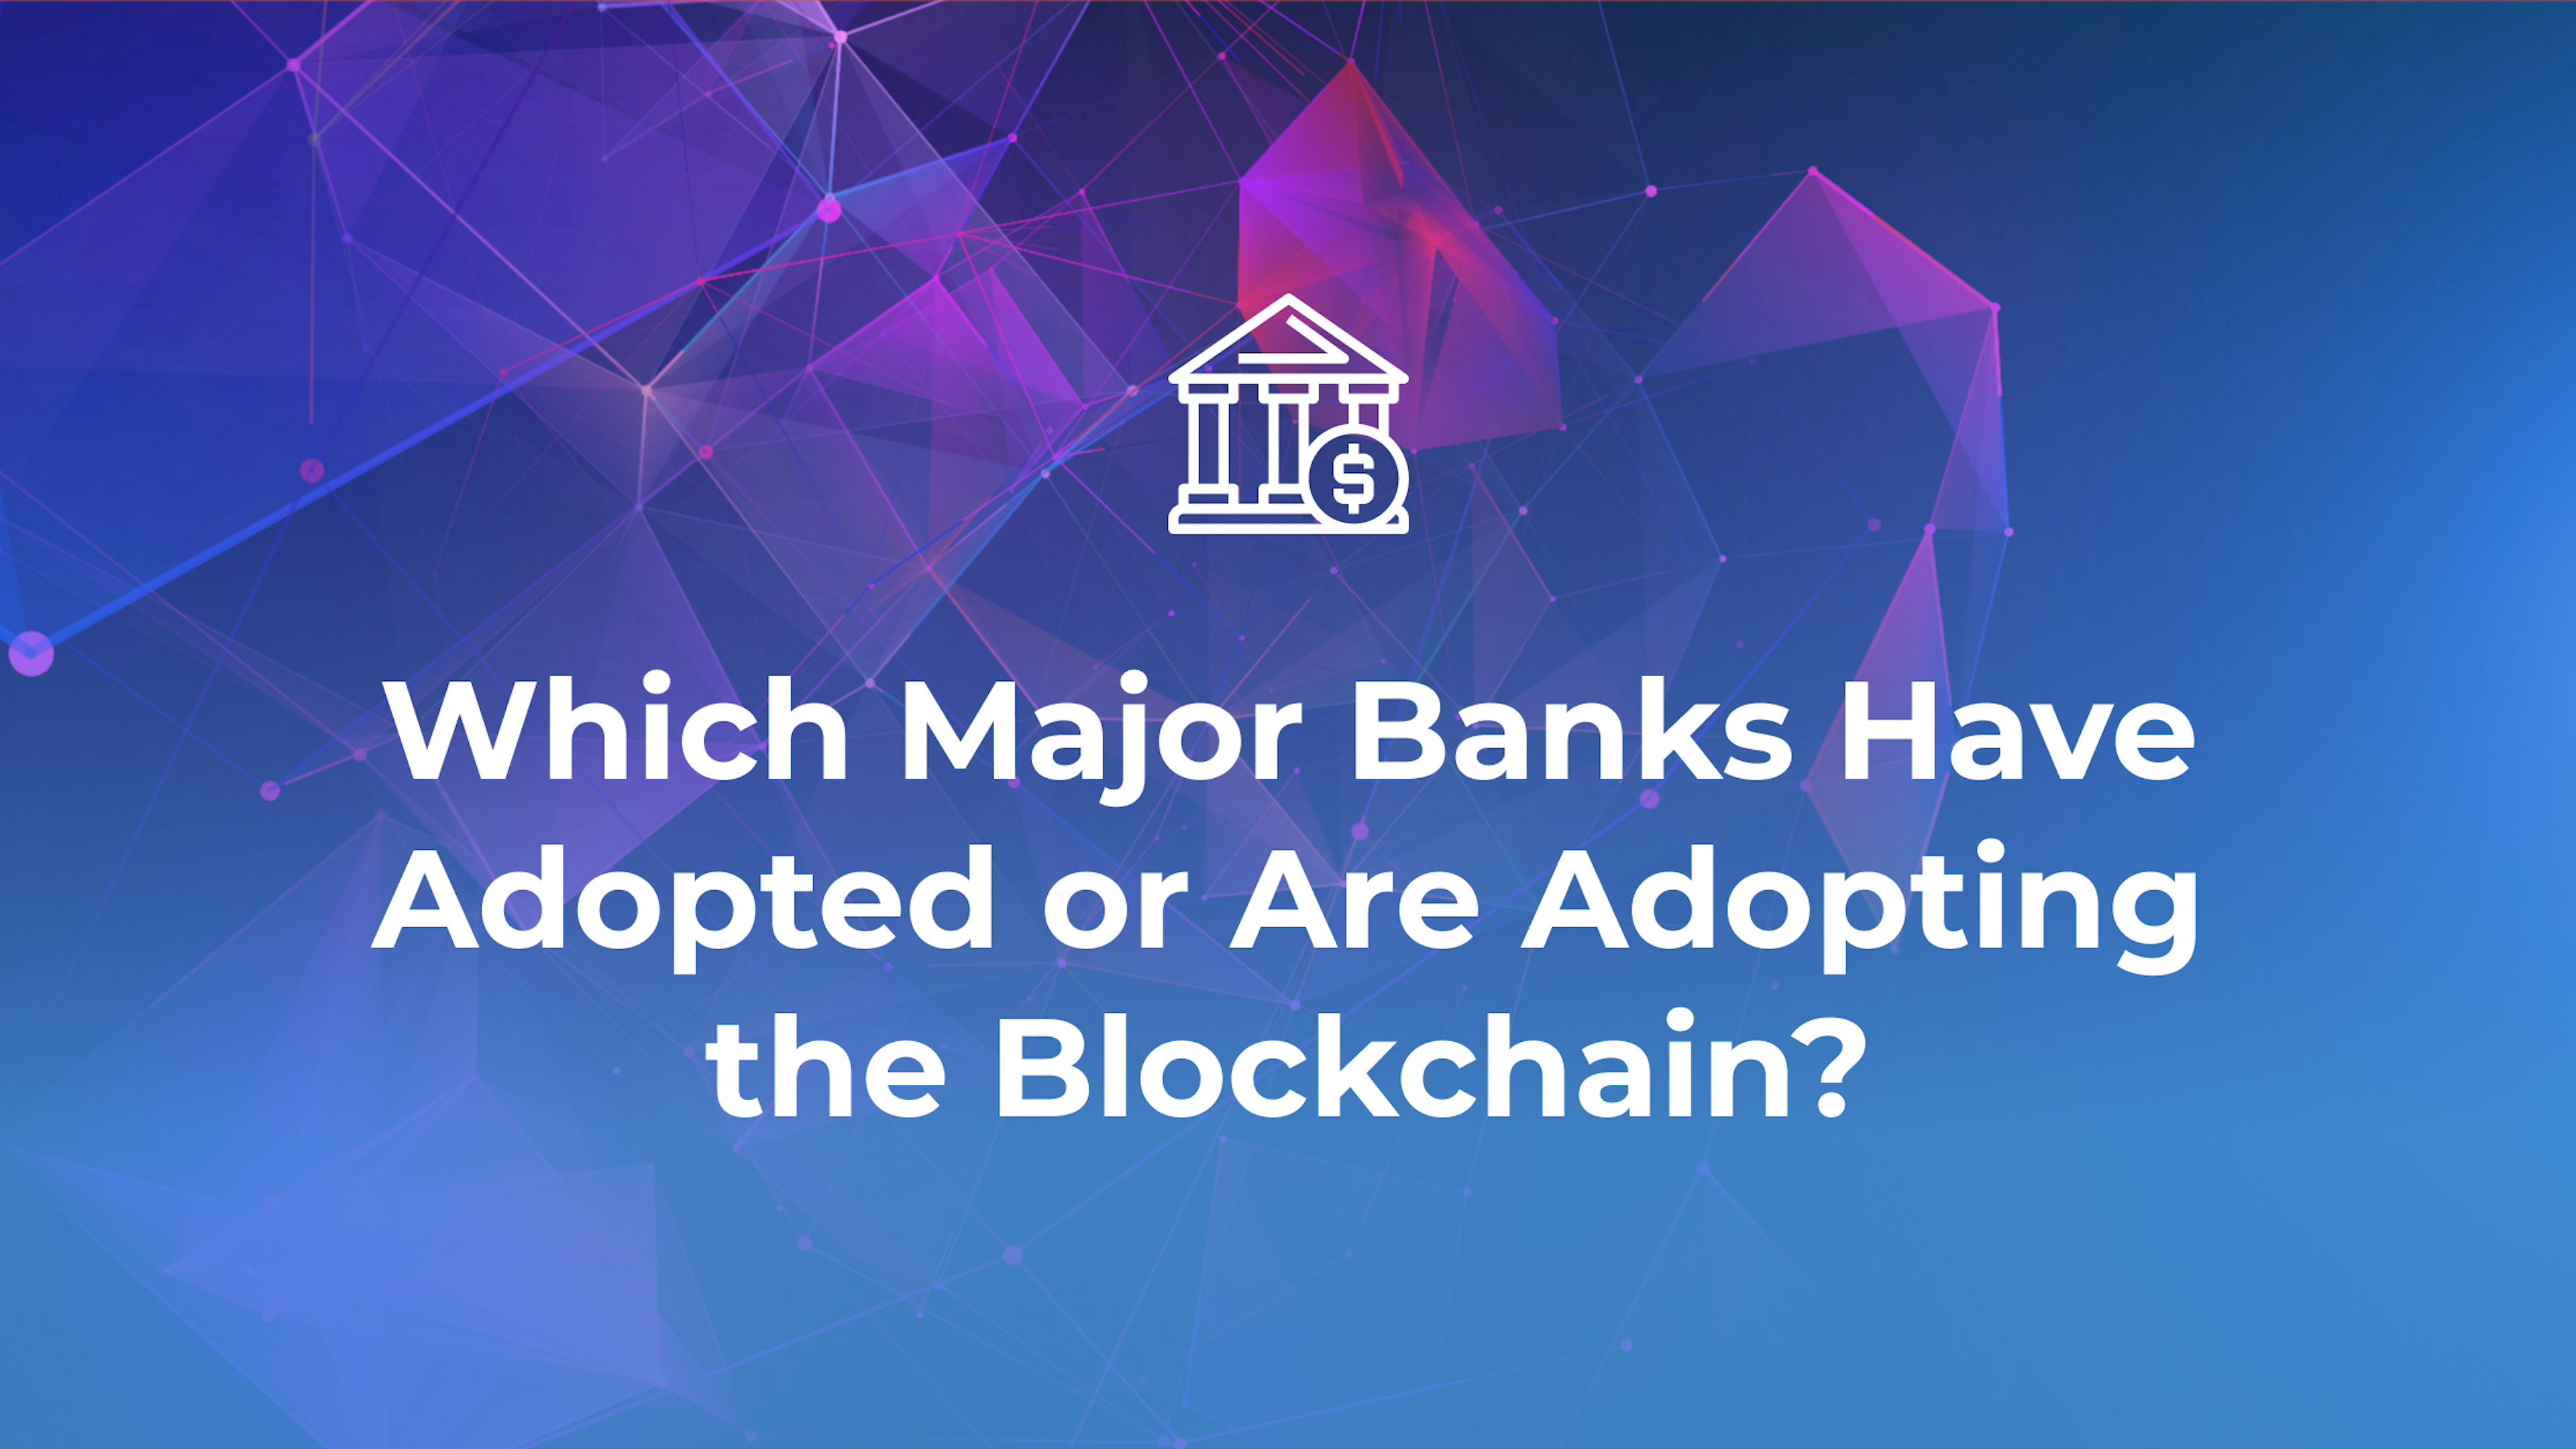 Which Major Banks Have Adopted or Are Adopting the Blockchain?